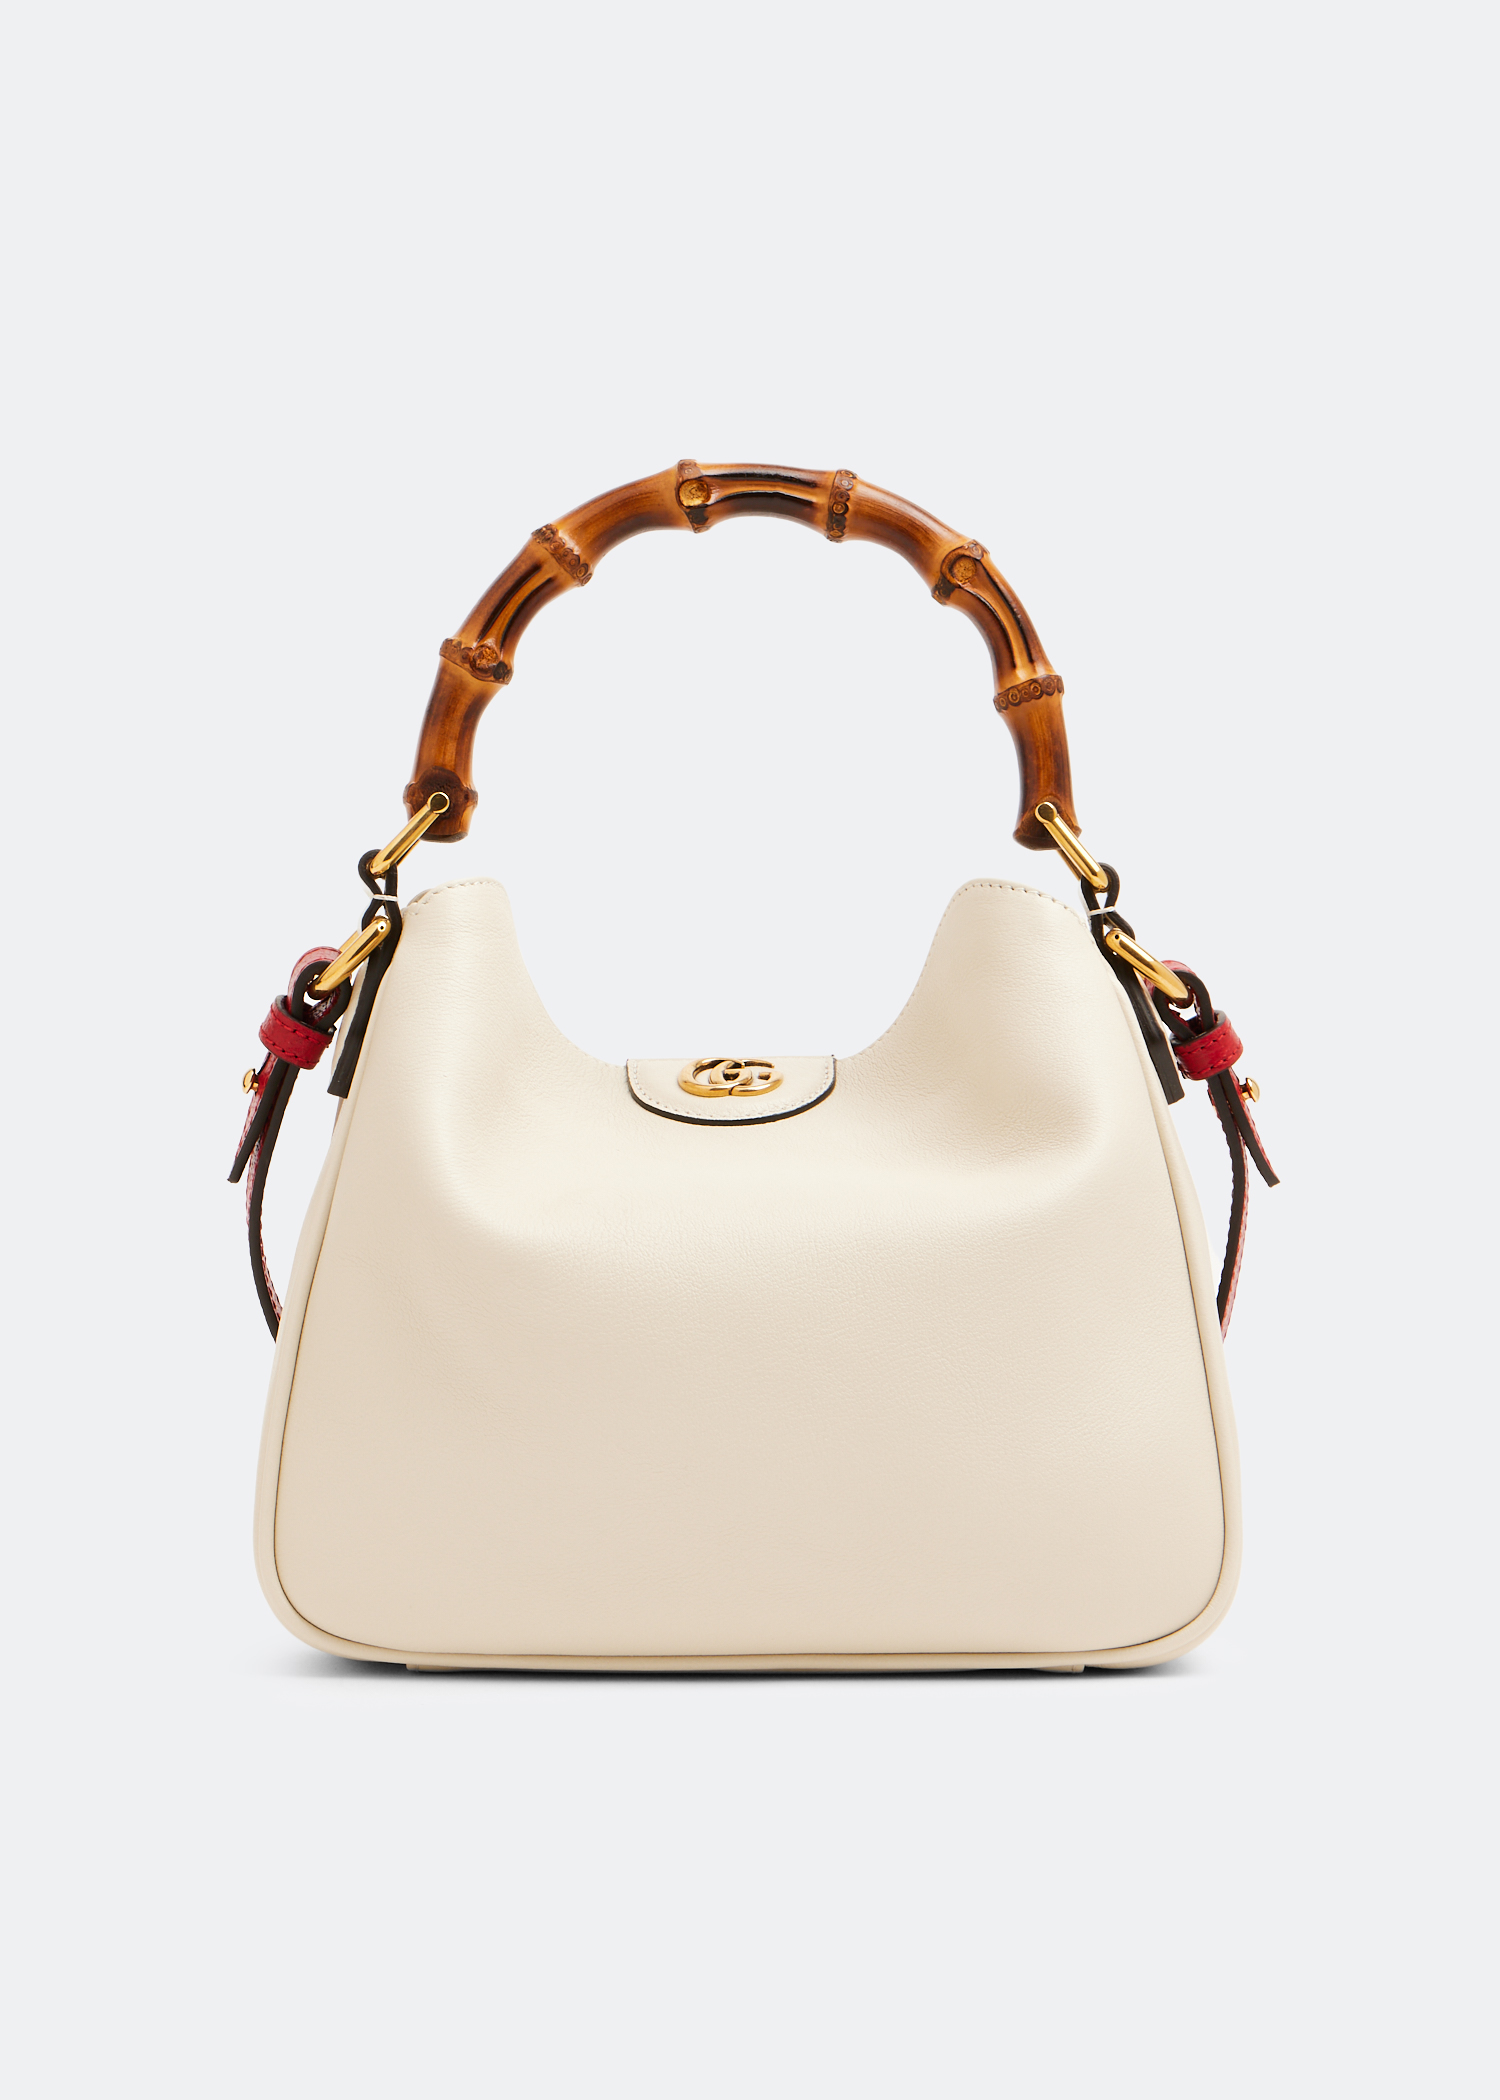 New Gucci White Leather w/Bamboo Handles Women's Purse "